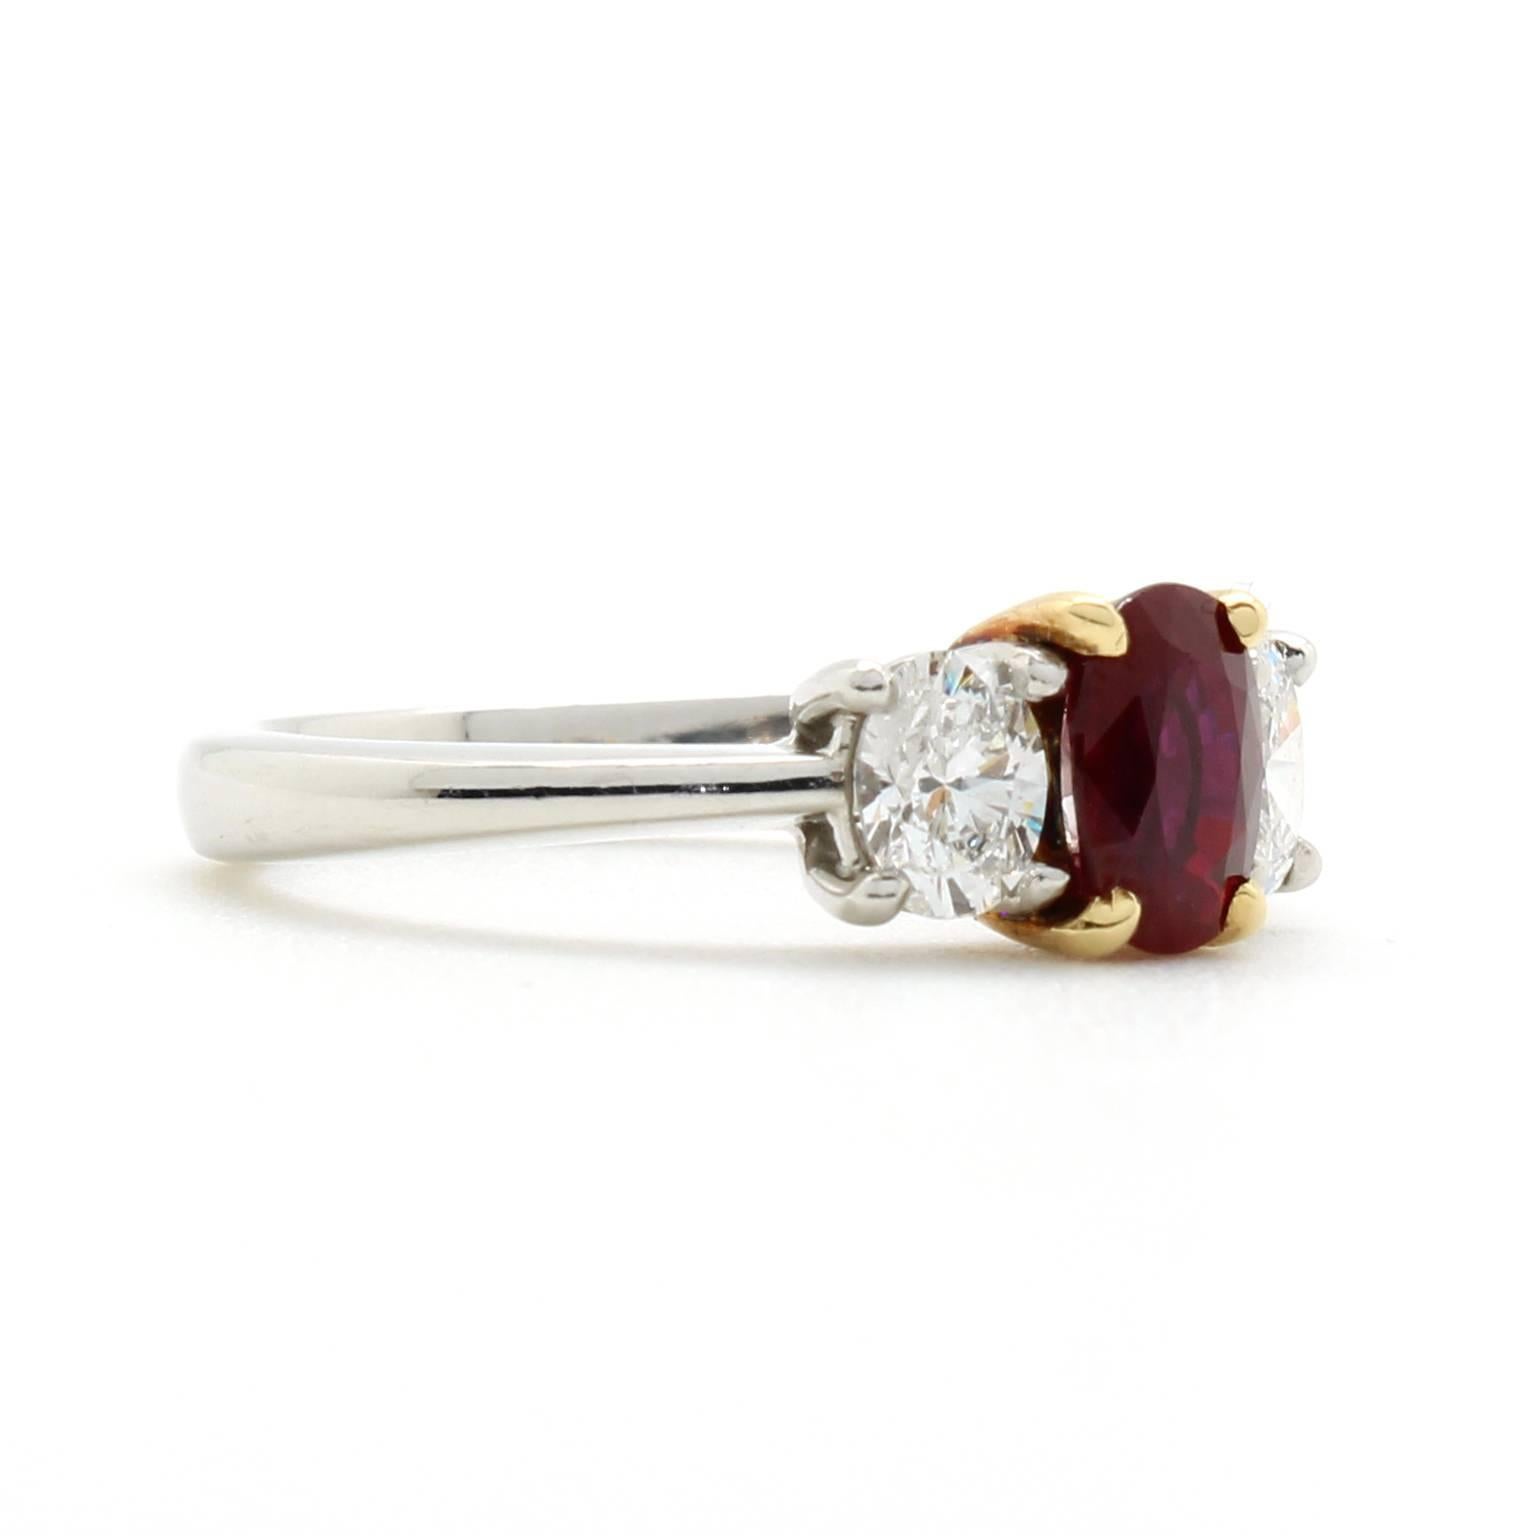 This two-tone vintage ring features a natural ruby set in 18k yellow gold prongs. The weight of the ruby is 1.08 carats and measures 6.8mm by 4.8mm in dimension. Two oval diamonds accent the ruby and have a total weight of 0.62 carats, F color and